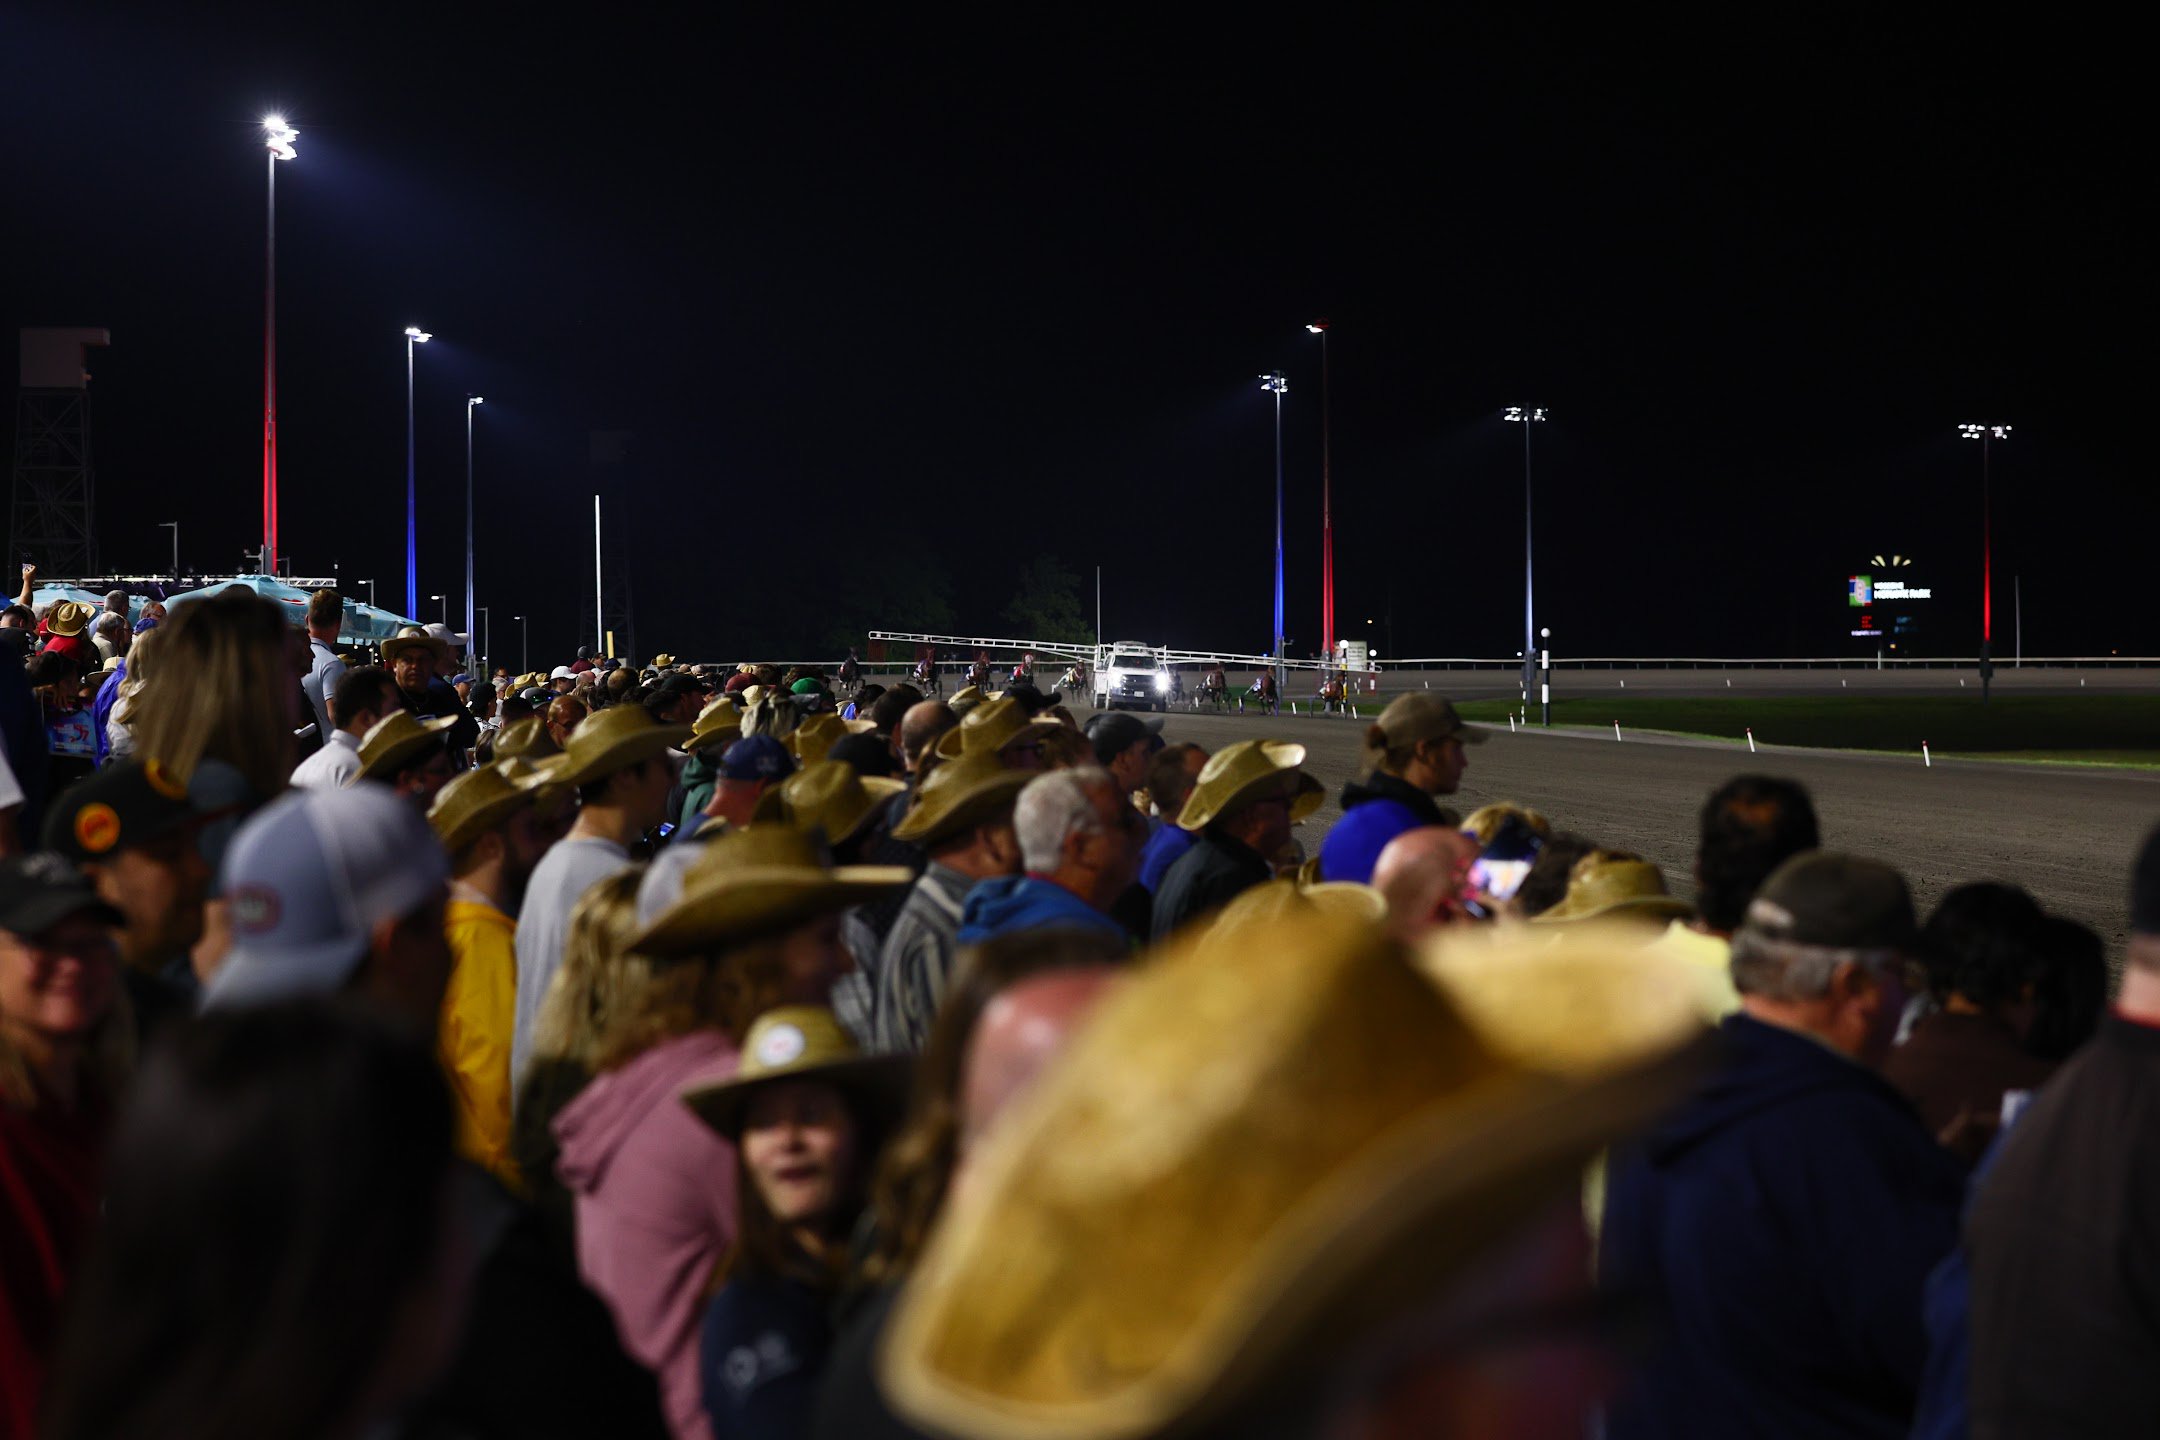 The crowd watches as the 2023 Pepsi North America Cup race begins.